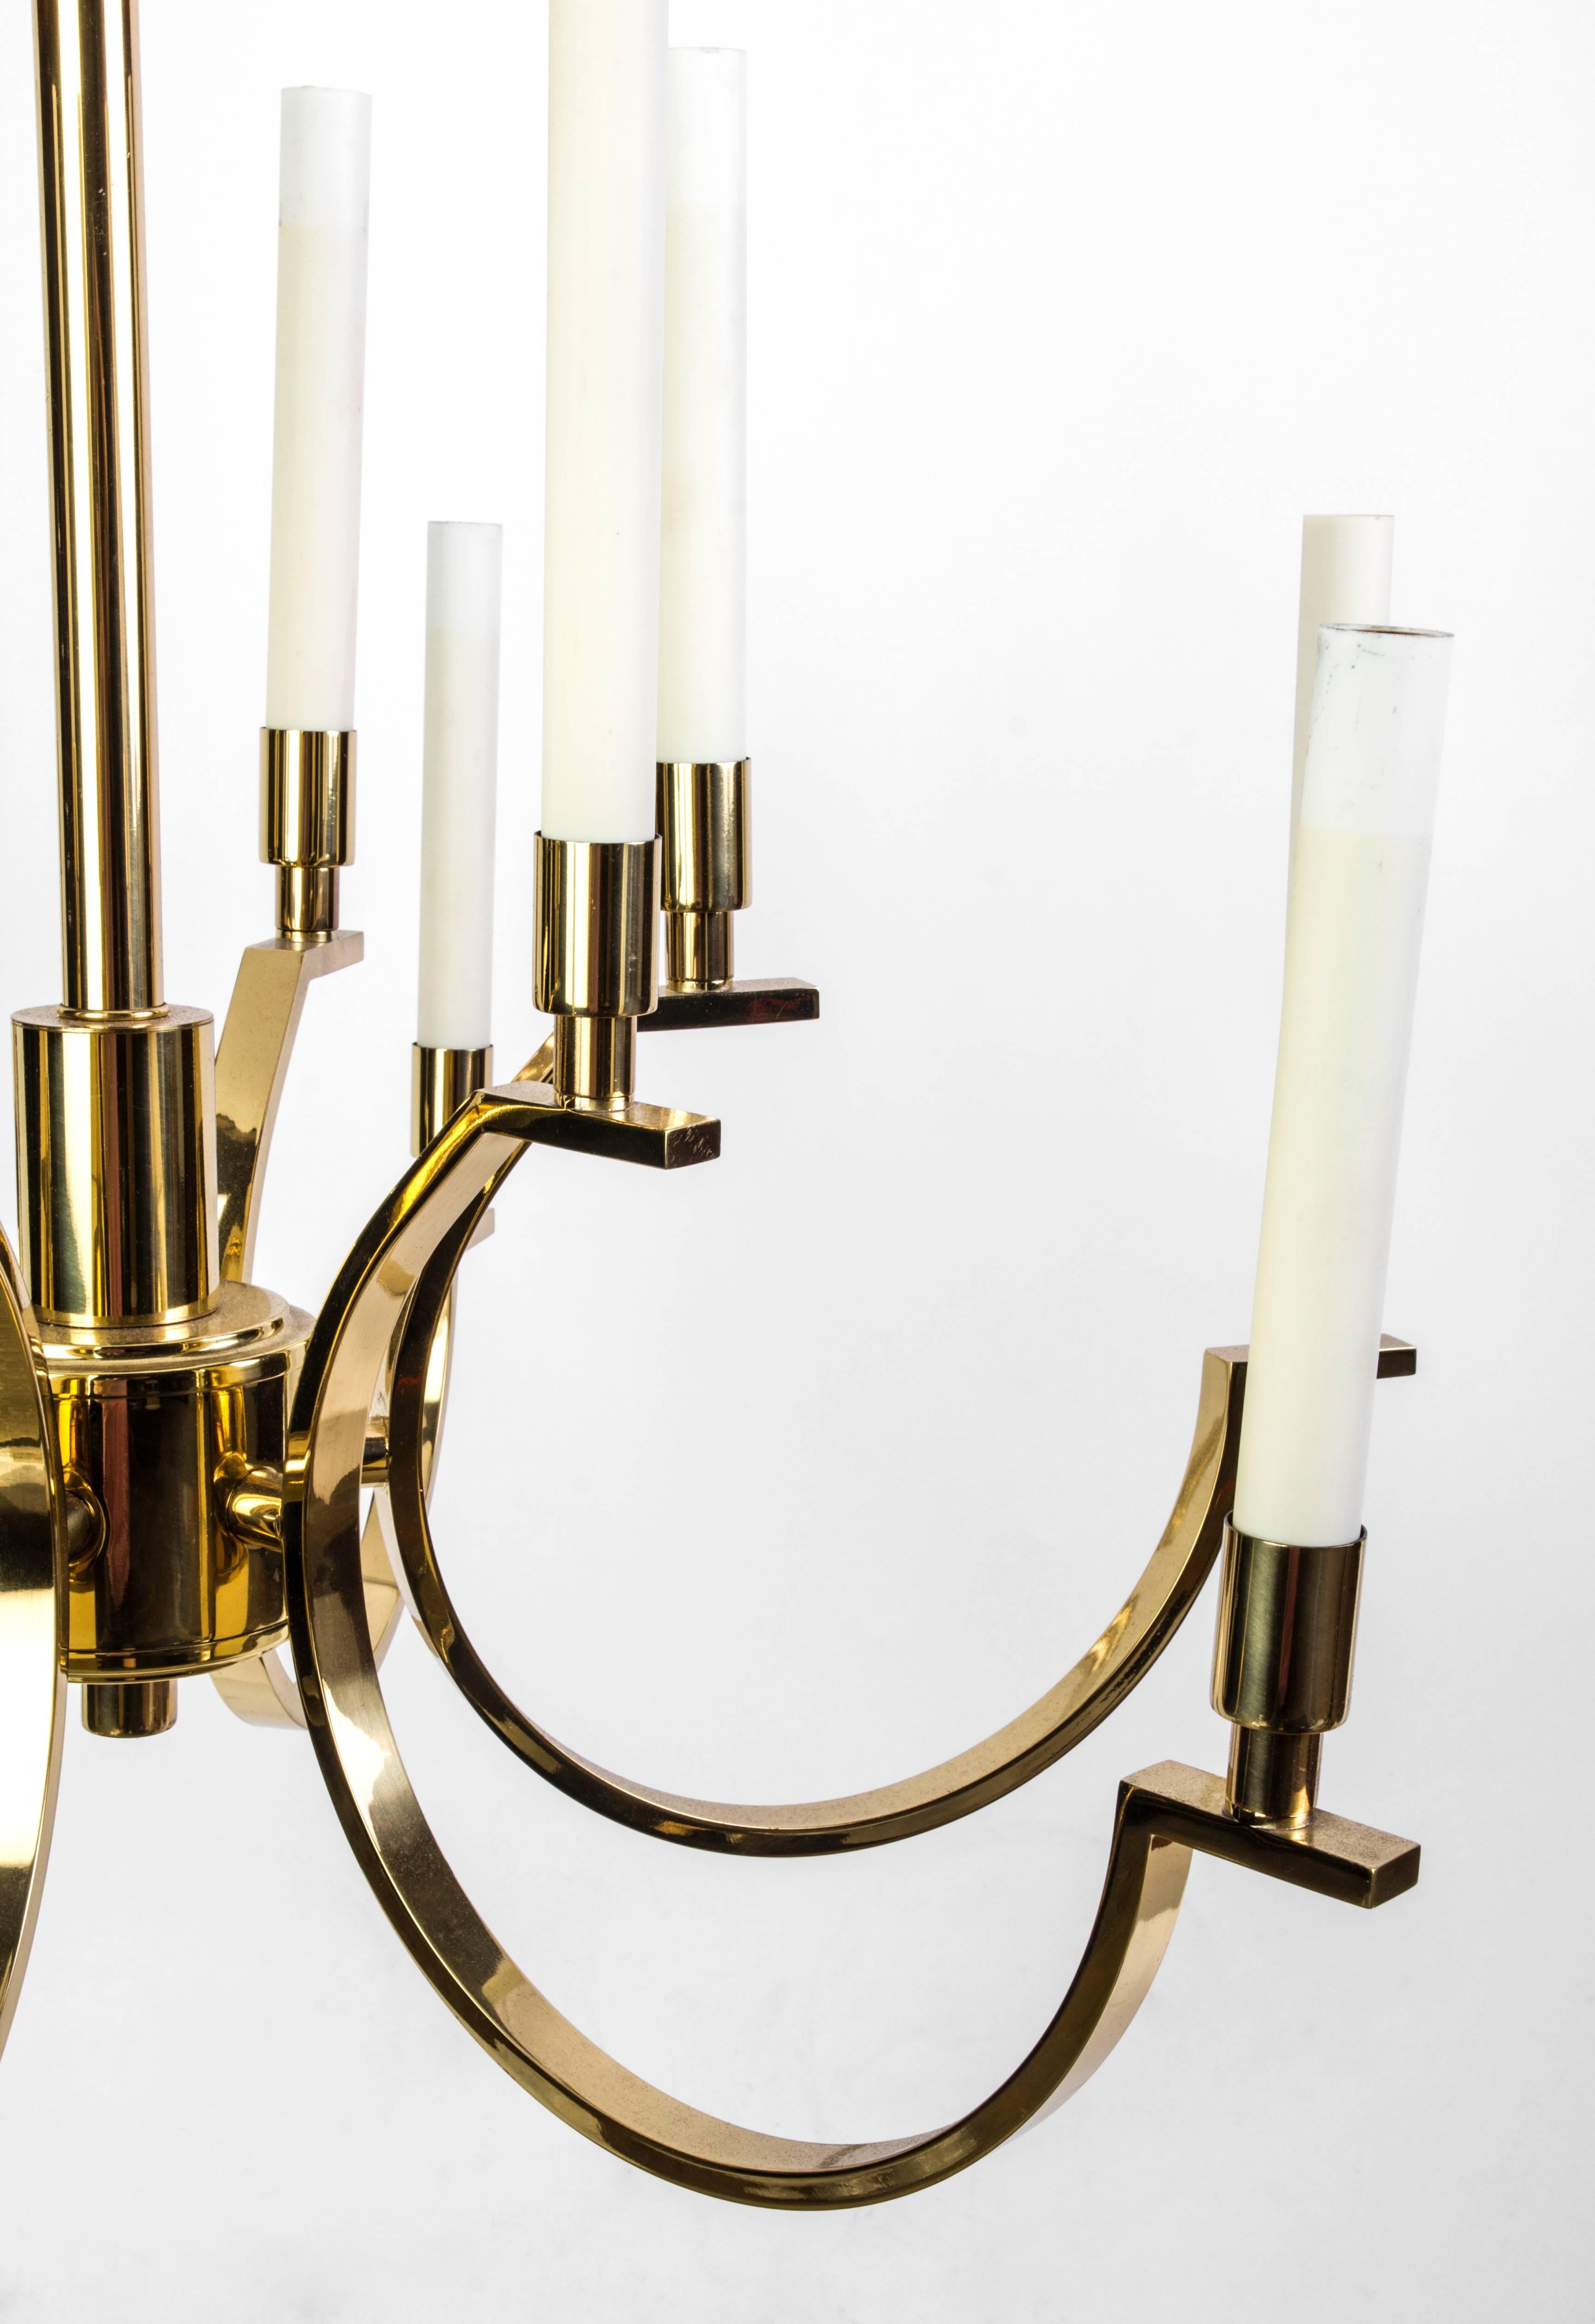 Mid-20th Century Exquisite Mid-Century Modernist Candelabra Chandelier by Frederick Cooper For Sale